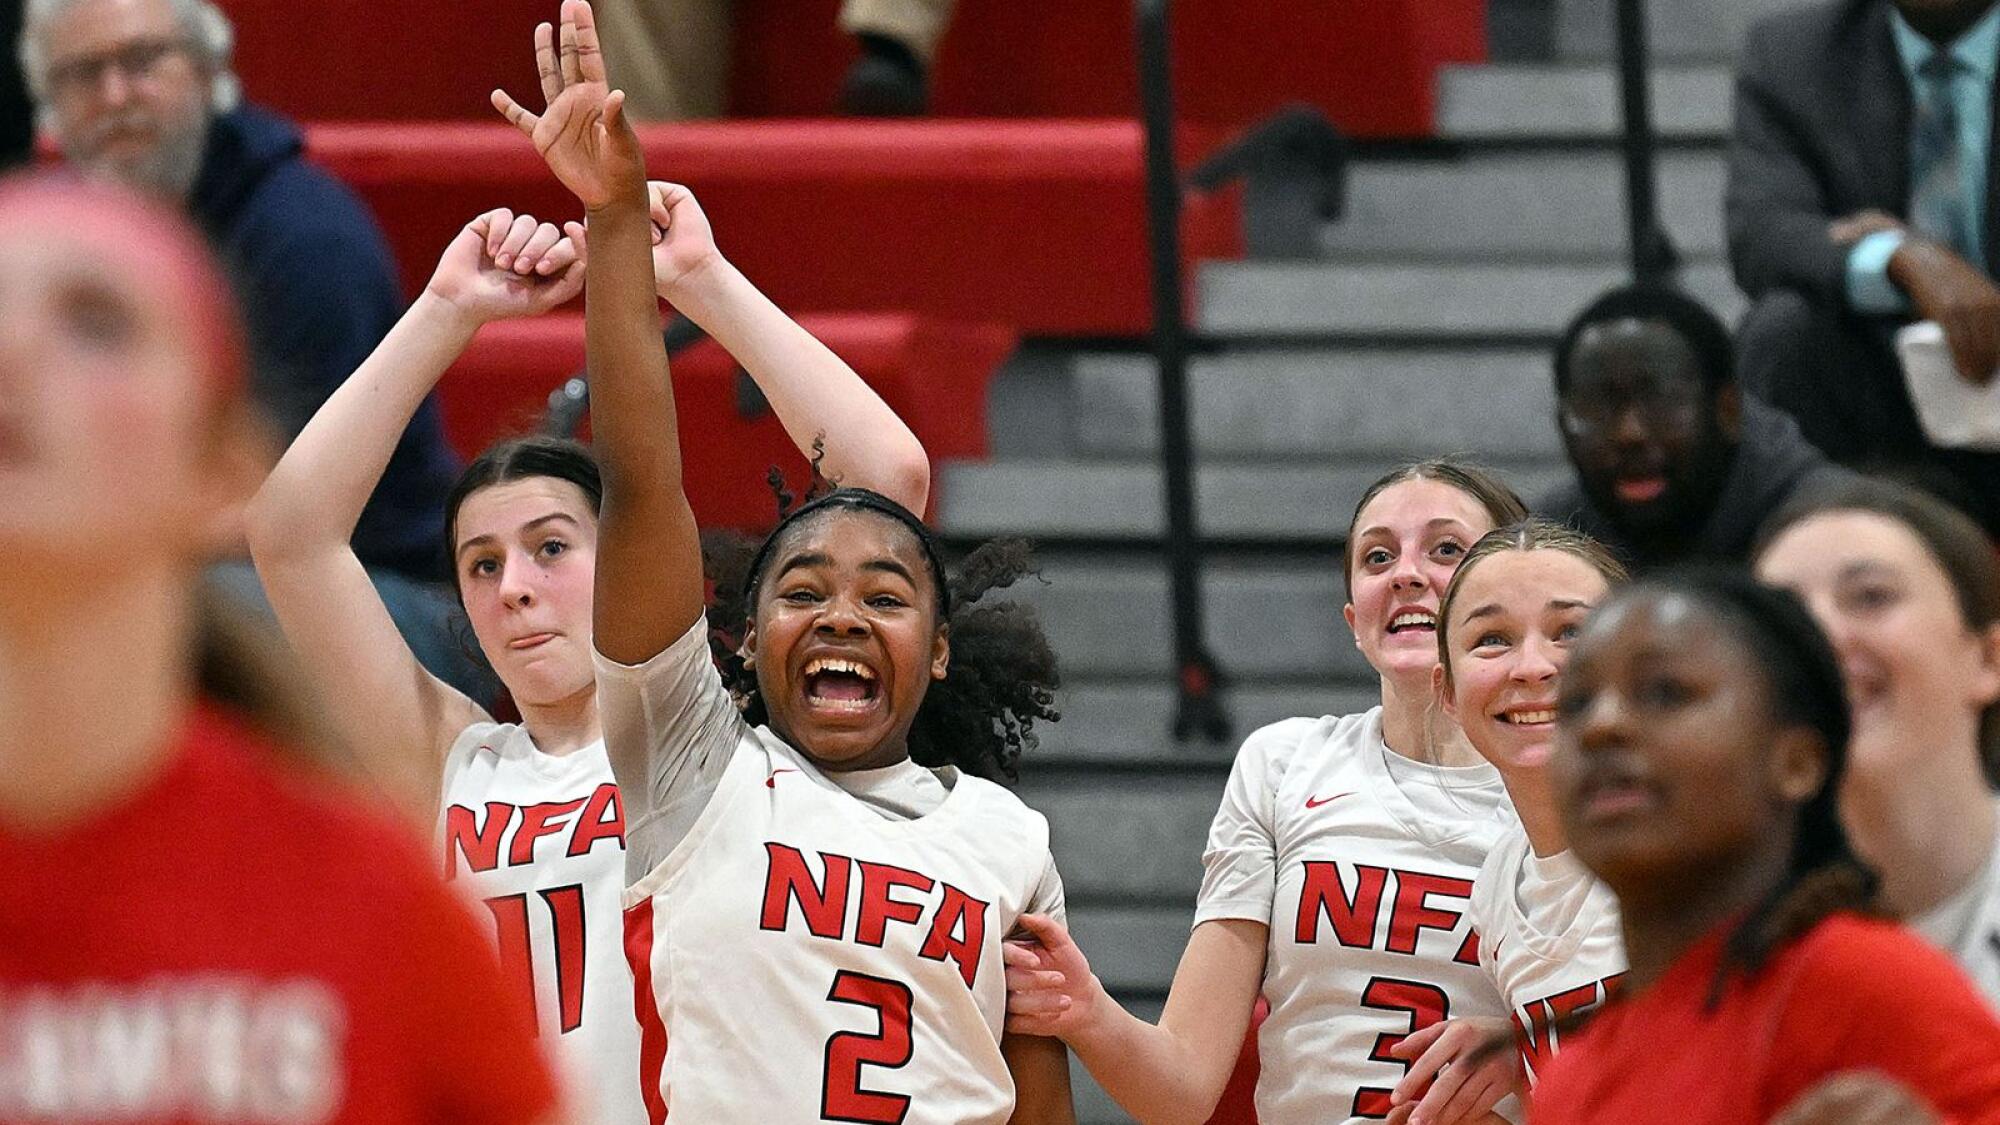 NFA girls basketball earns win over Manchester in state tournament